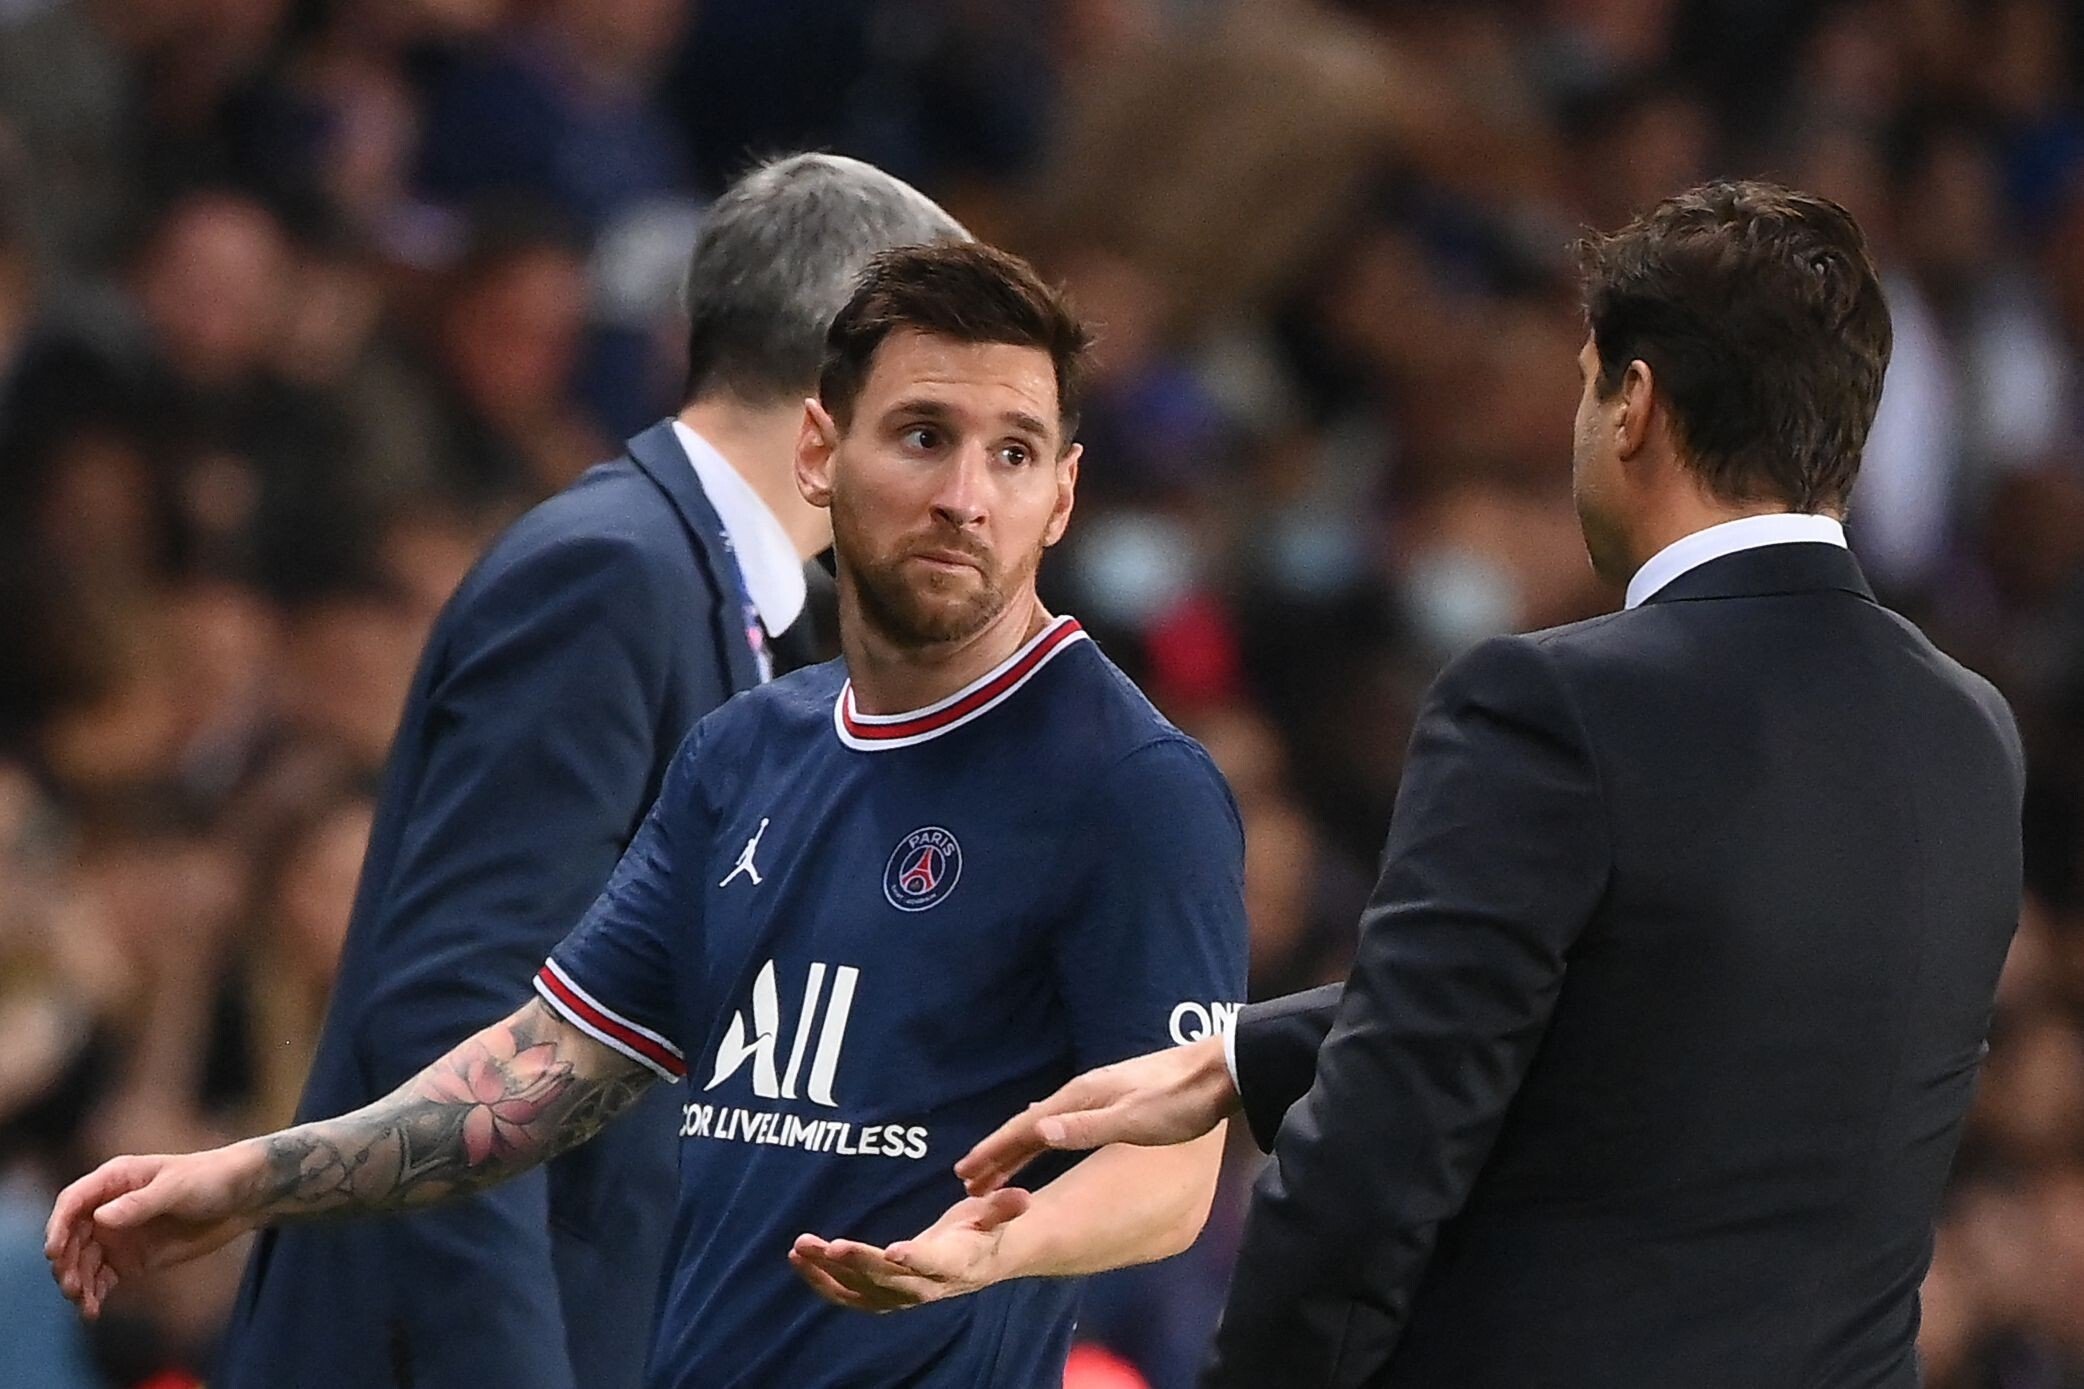 Paris Saint-Germain forward Lionel Messi looked puzzled after he was substituted. Photo: APF